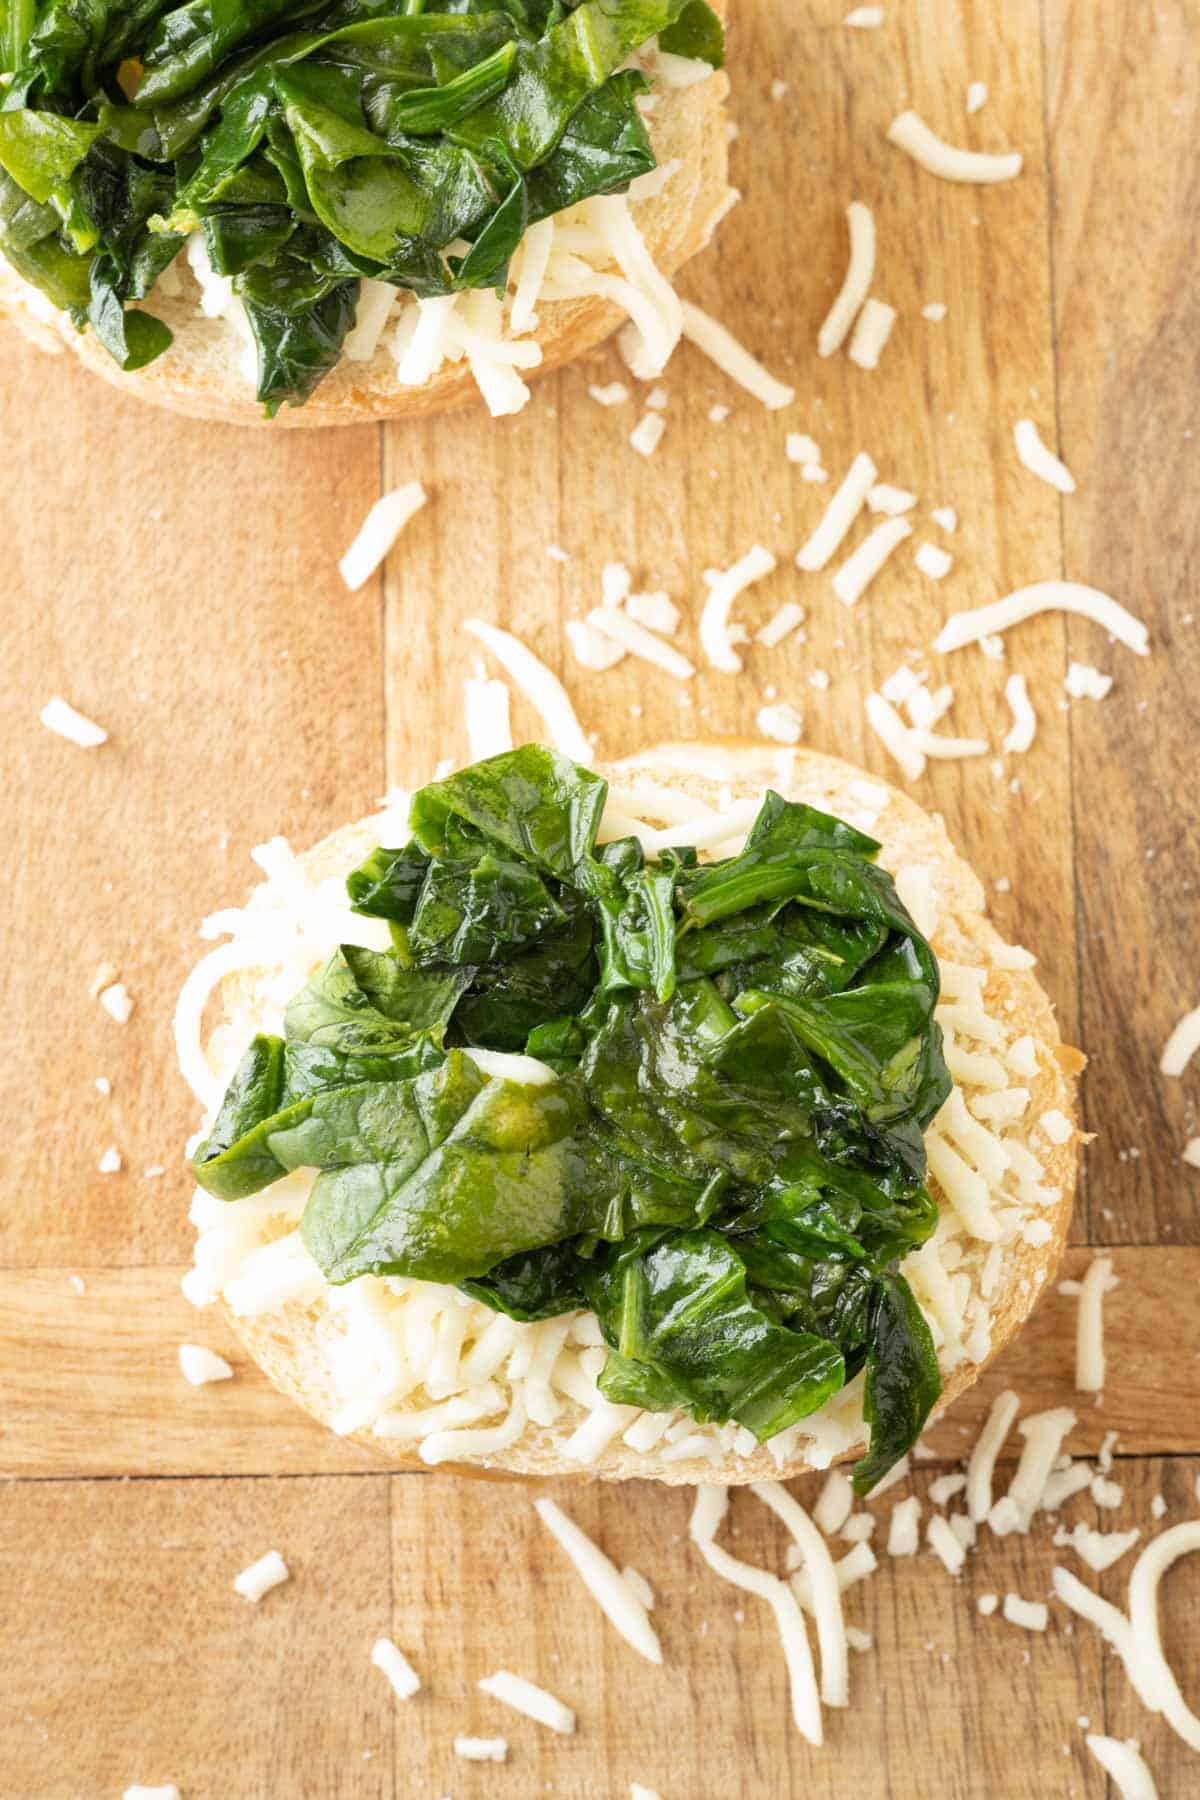 Slices of bread topped with grated cheese and sautéed spinach on a wooden cutting board.